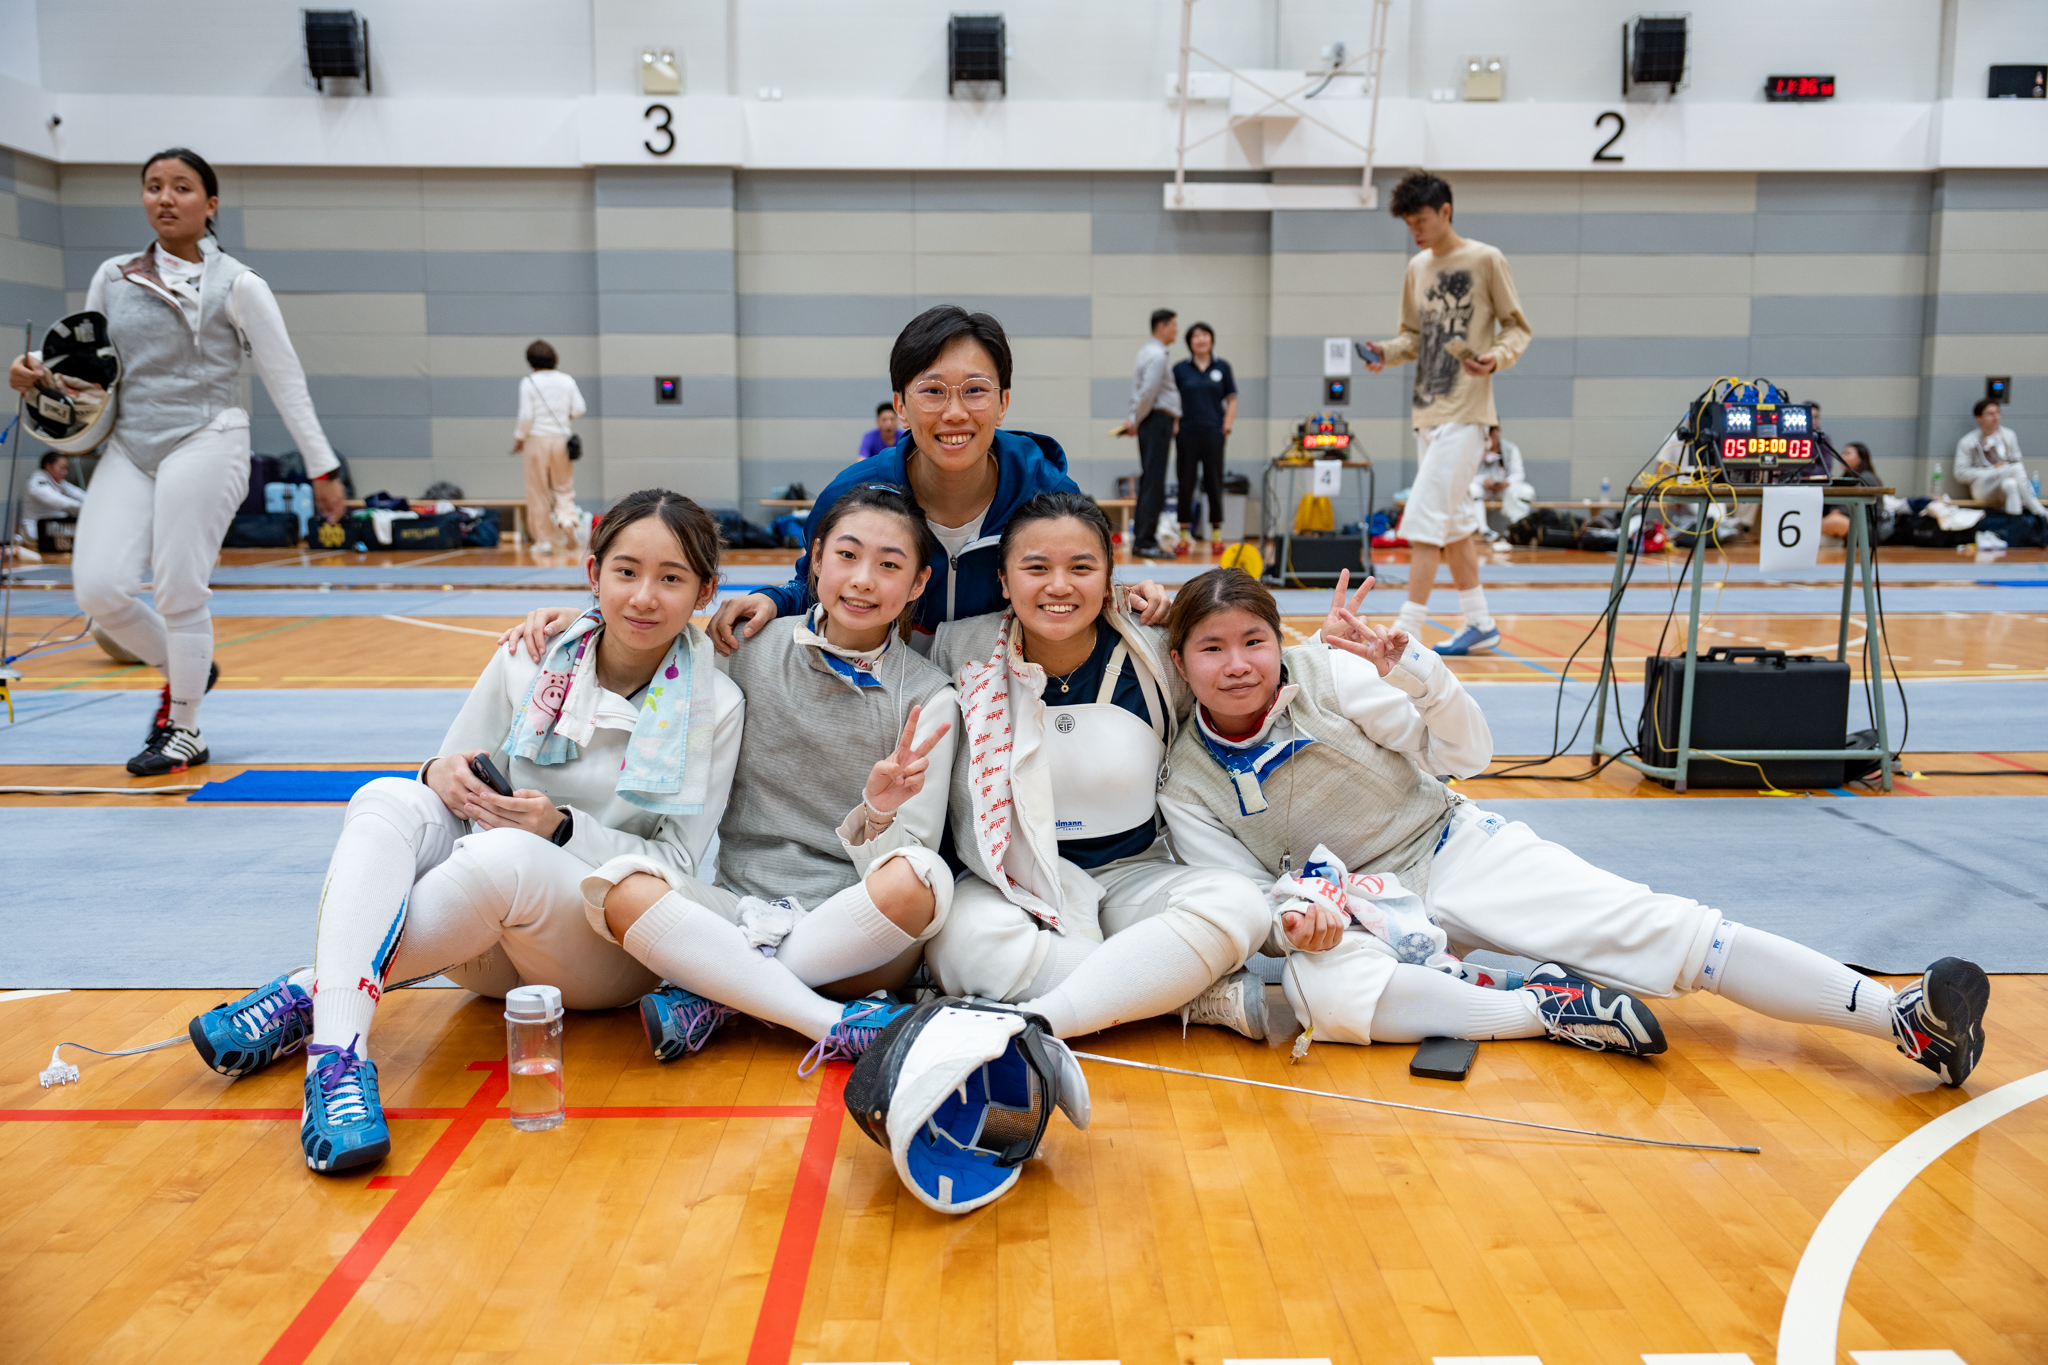 Ex-member of China Hong Kong Fencing Team and HKBU Alumni Miss Au Sin-ying (middle) serves as the coach of the HKBU Fencing Team.